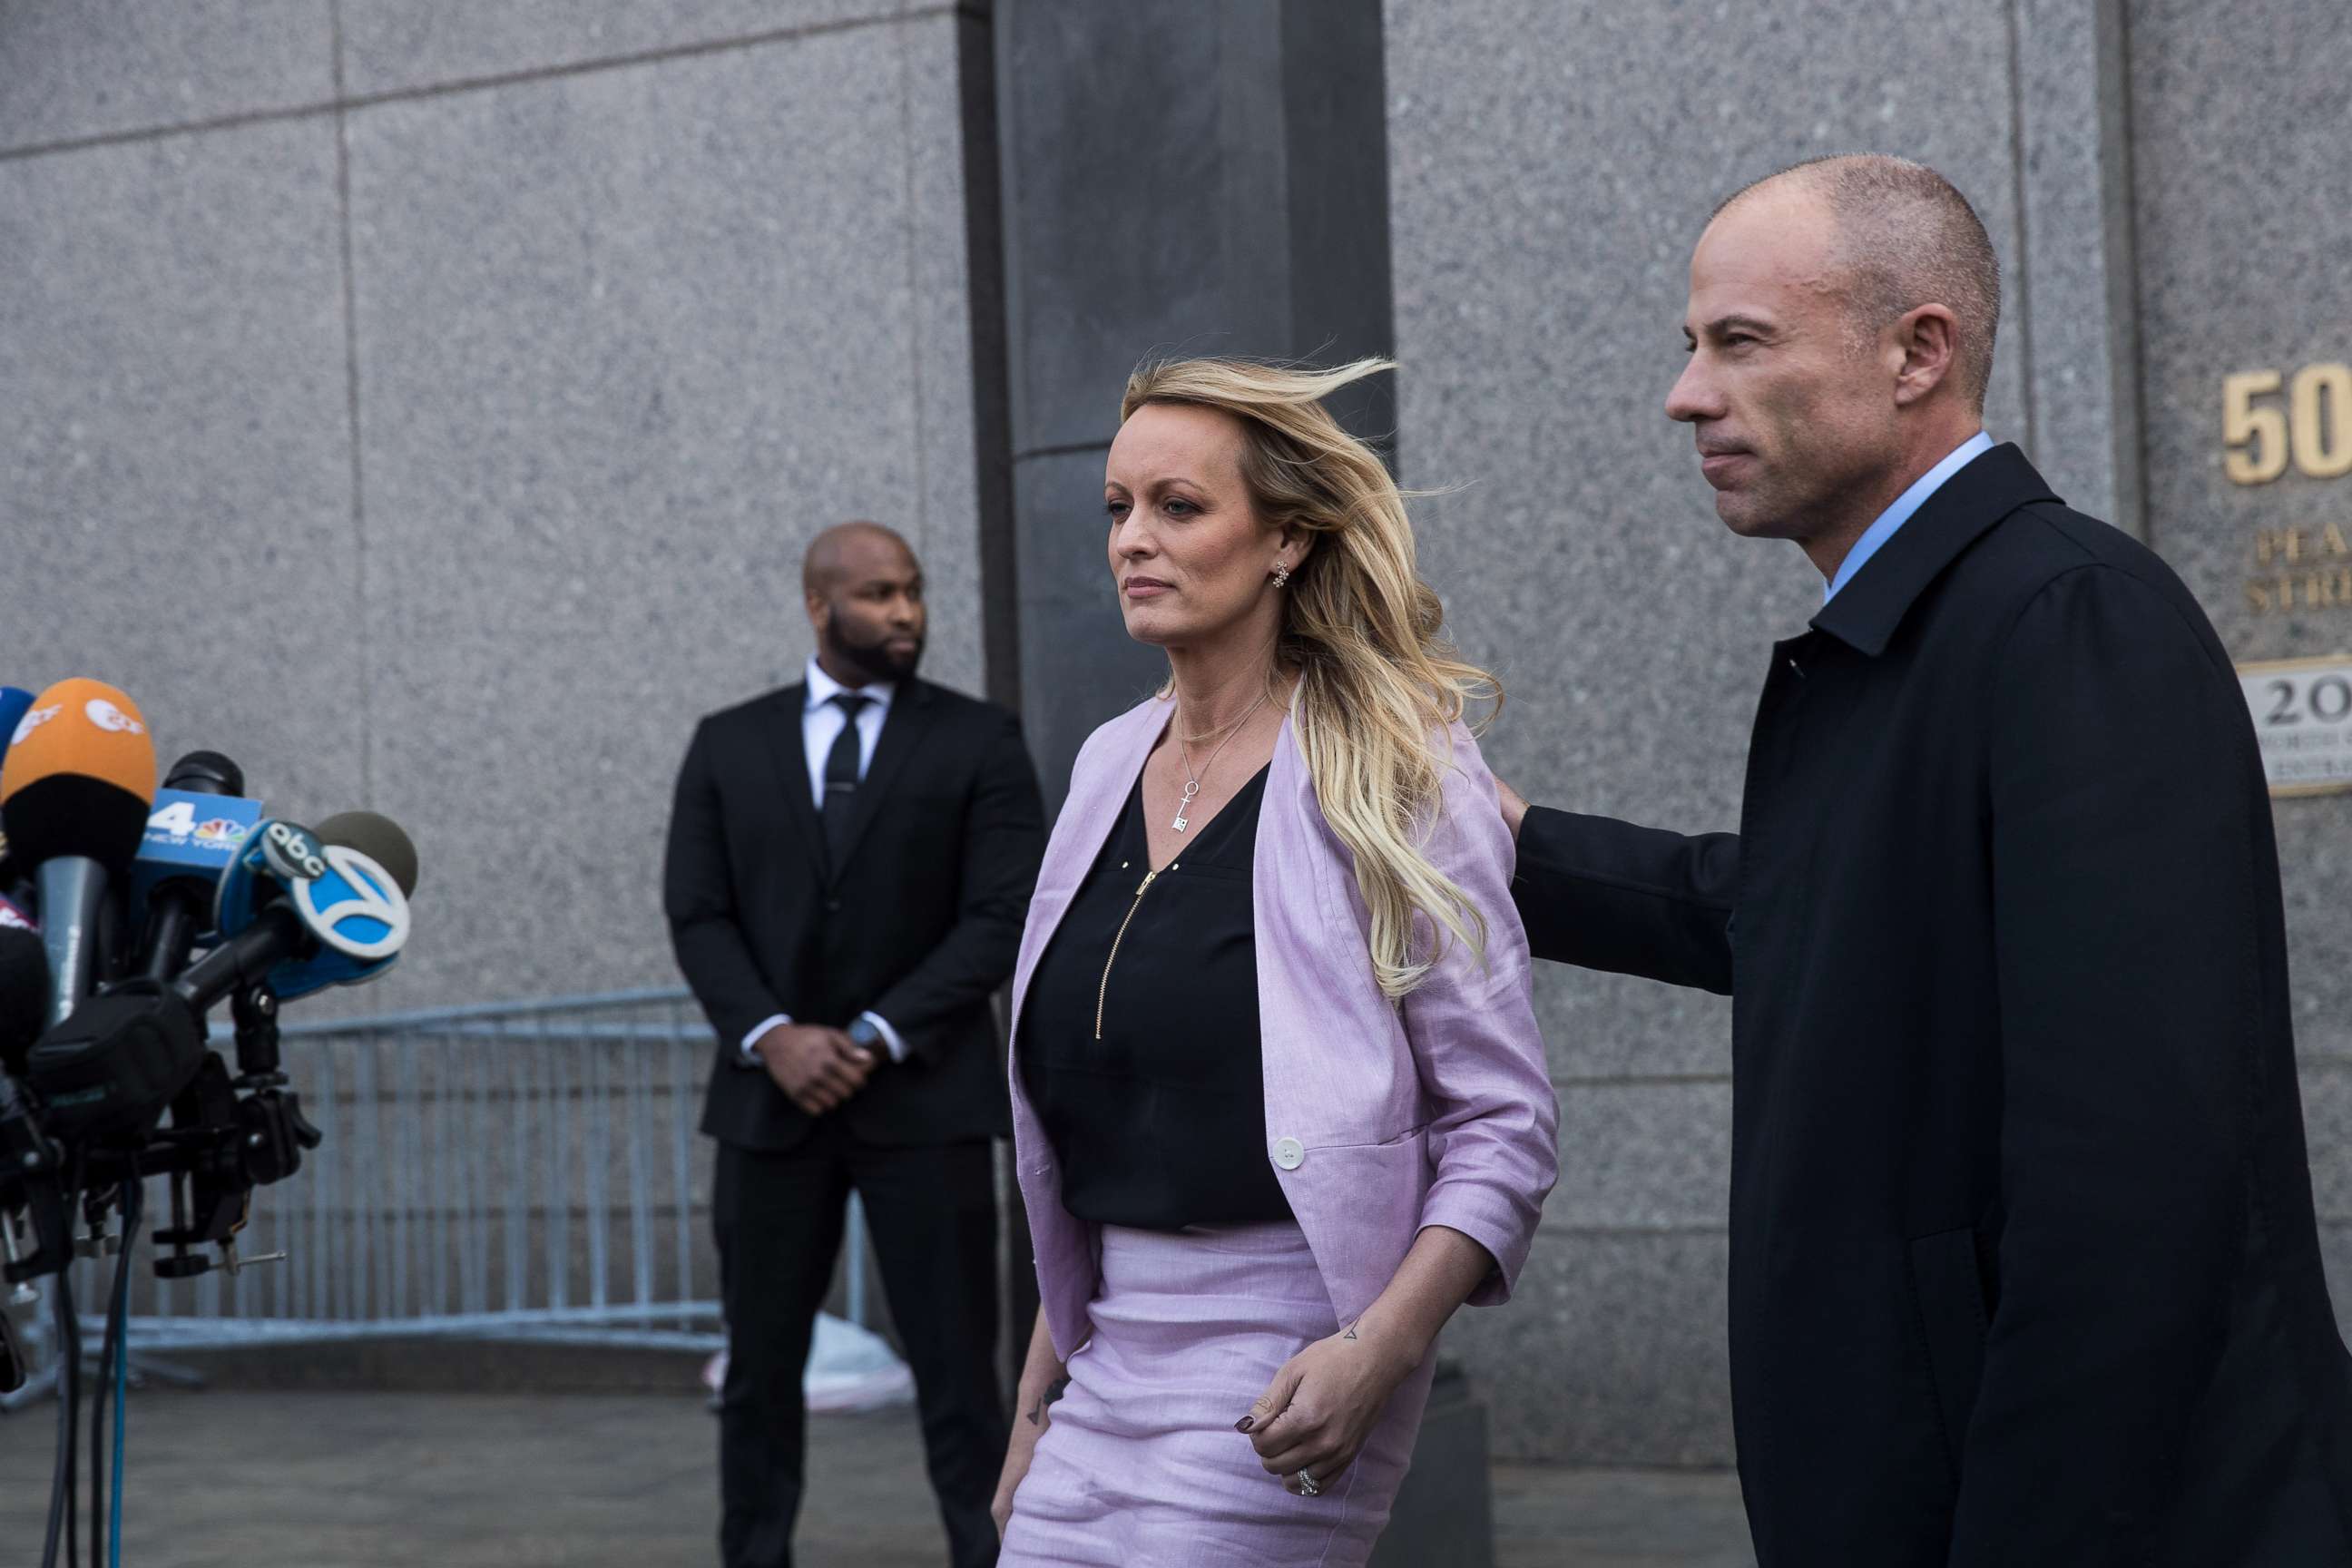 PHOTO: Stormy Daniels (Stephanie Clifford) and Michael Avenatti, attorney for Stormy Daniels, exit the courthouse, April 16, 2018 in New York City. 